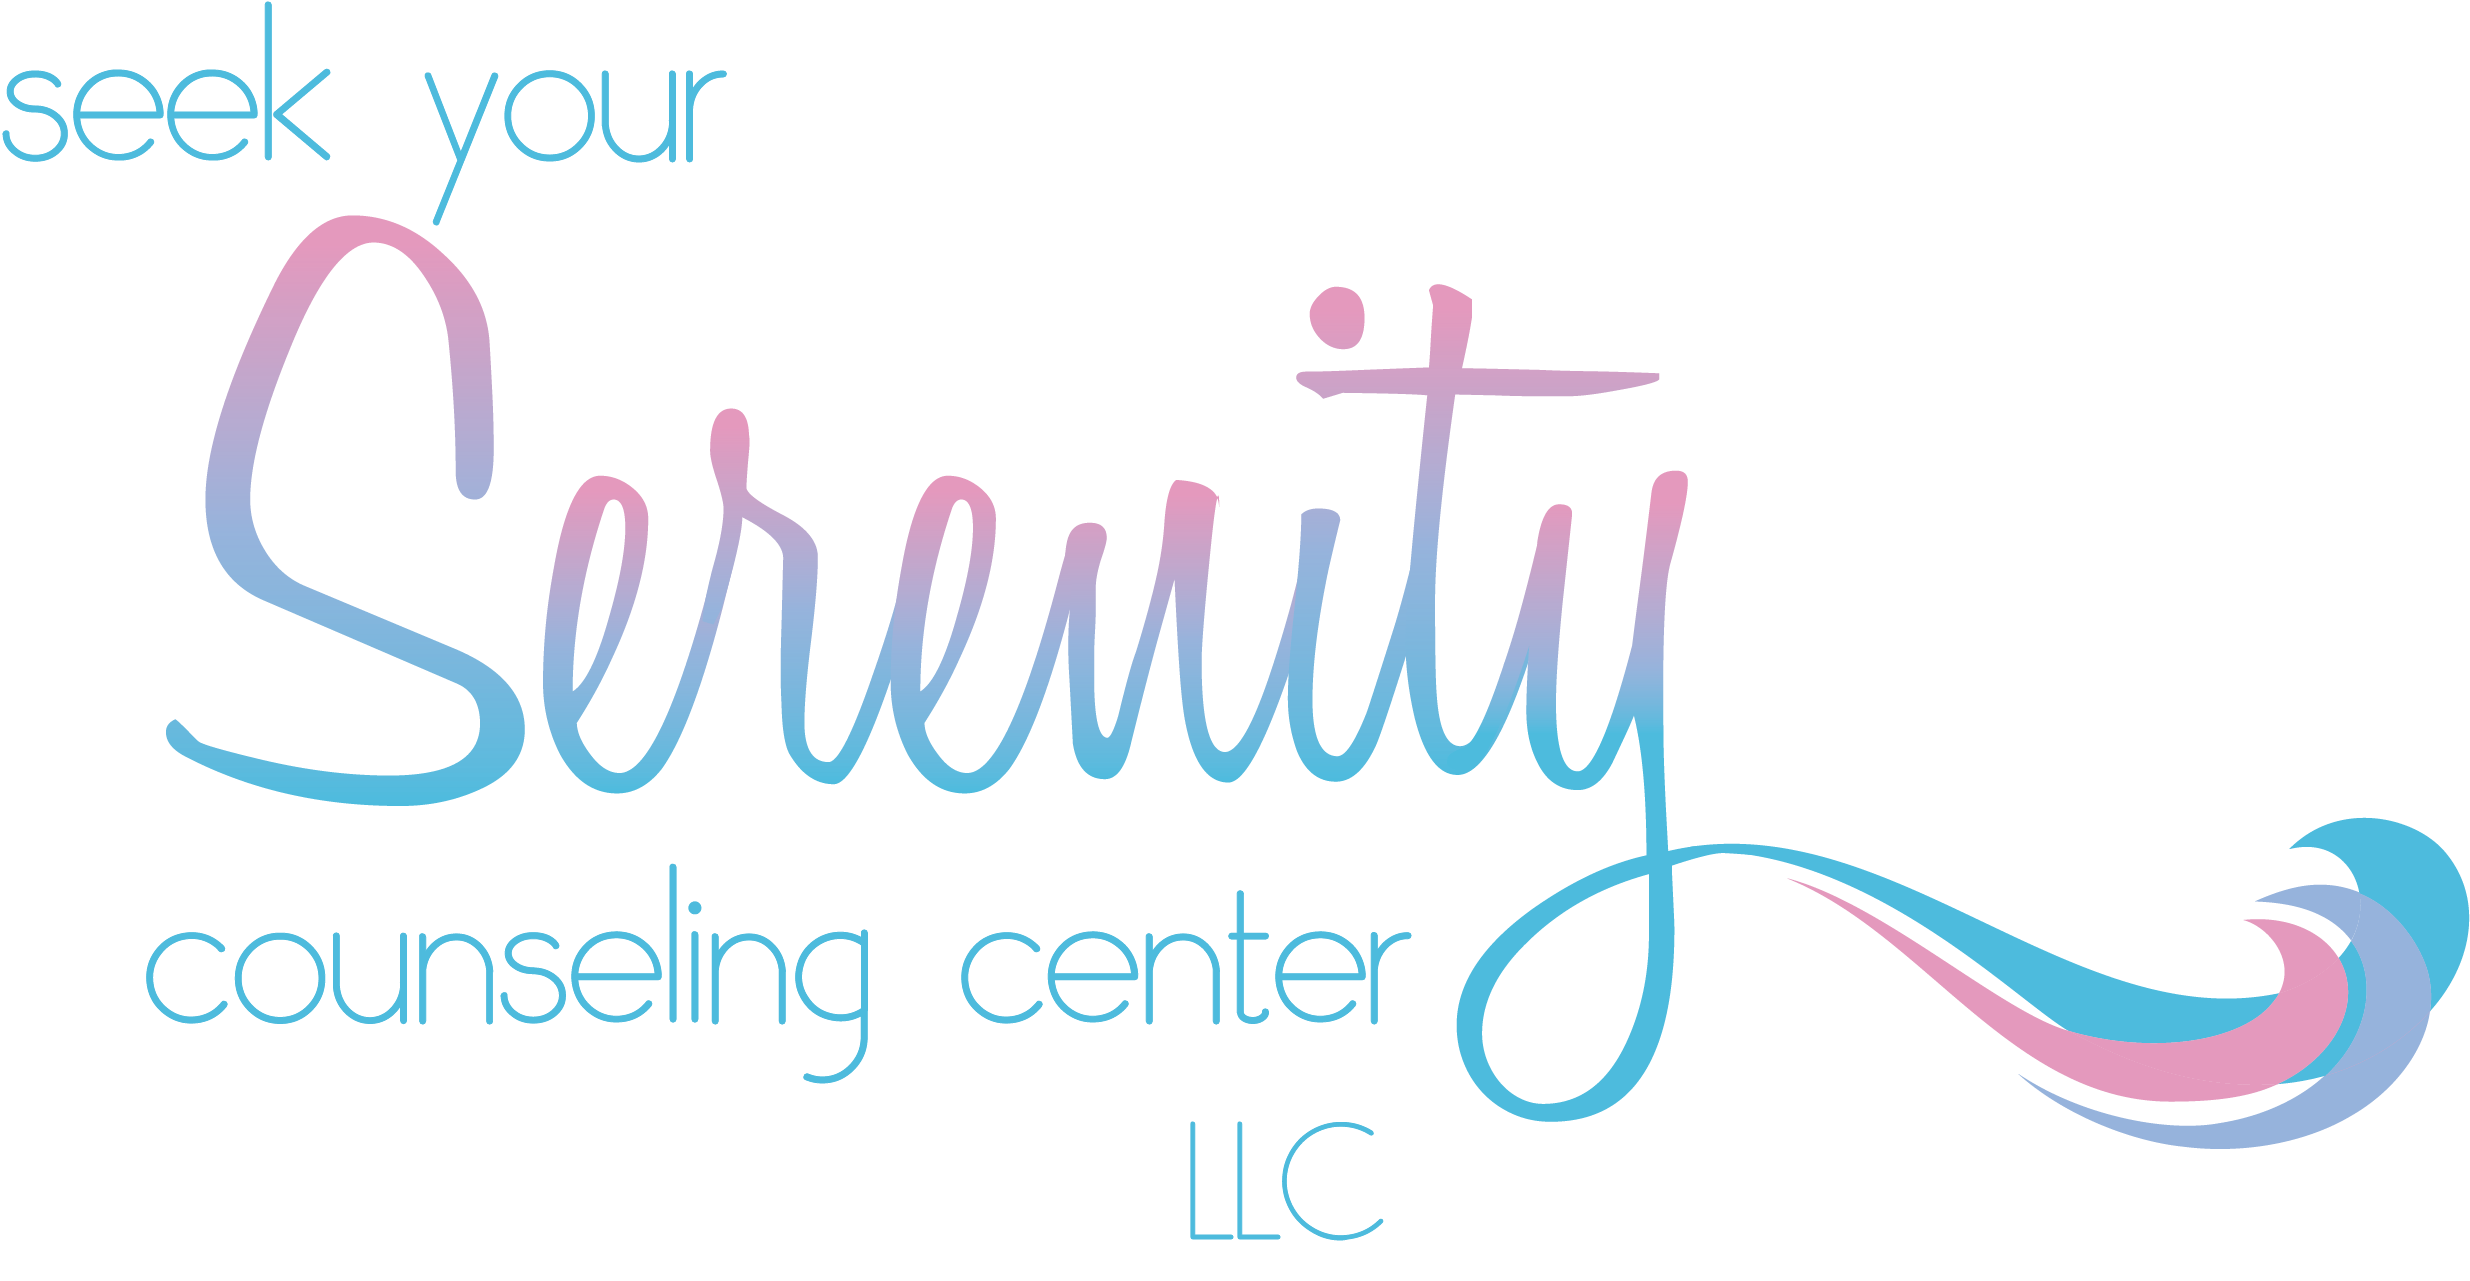 Seek Your Serenity Counseling Center, LLC